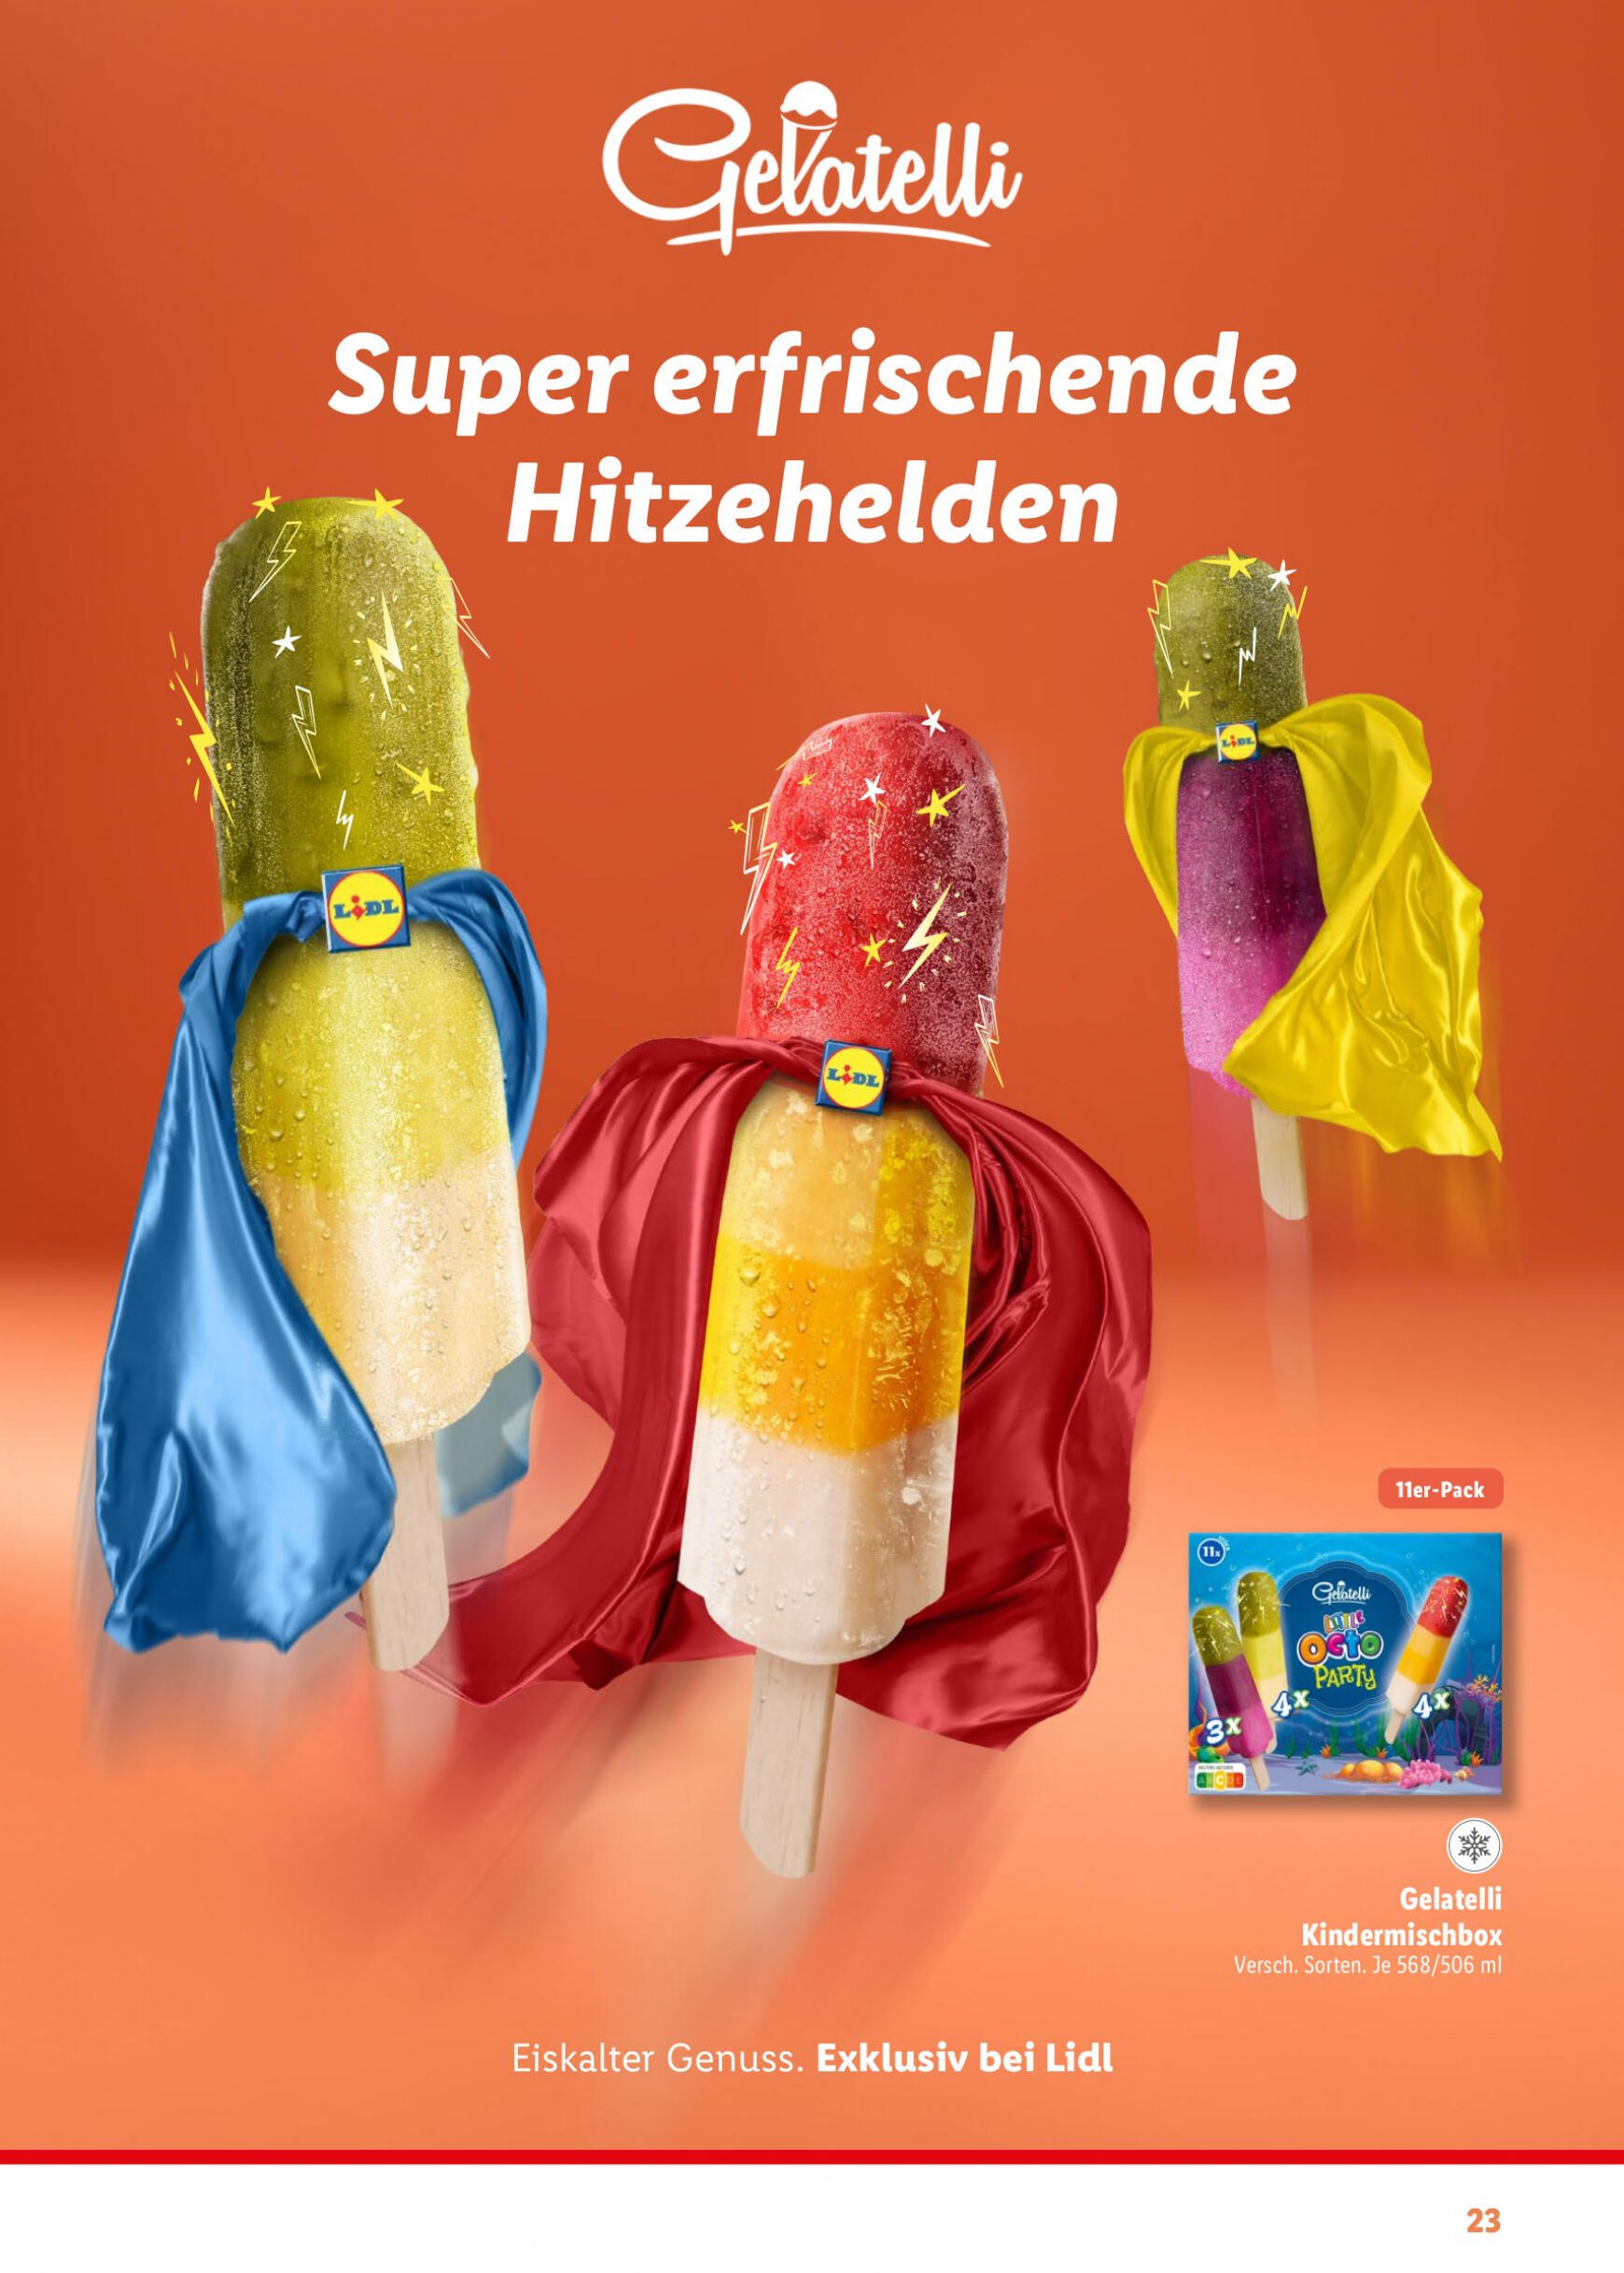 lidl - Flyer Lidl - aktuell 13.05. - 16.06. - page: 23